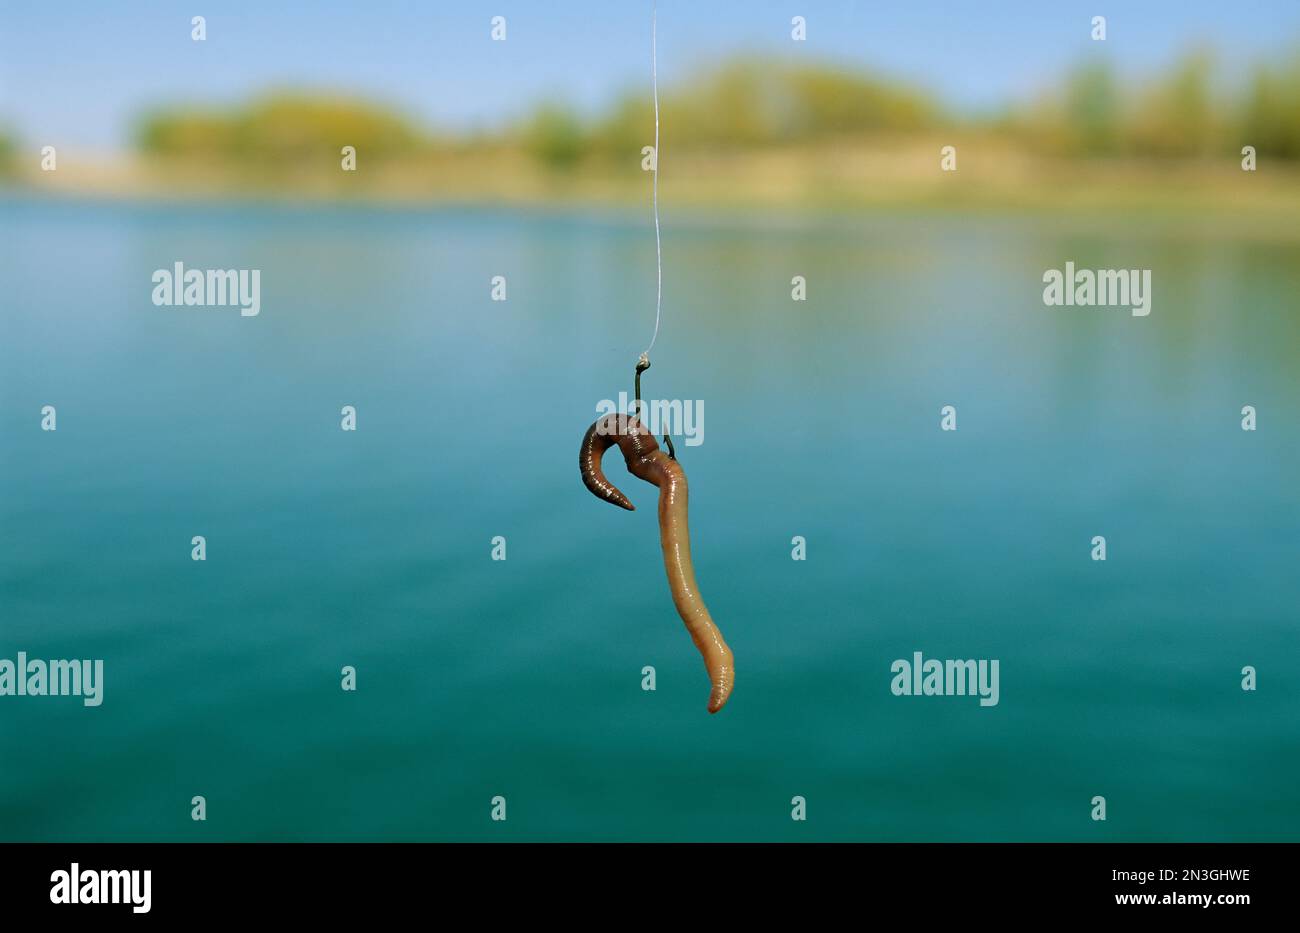 A fishing hook baited with an earthworm Stock Photo - Alamy